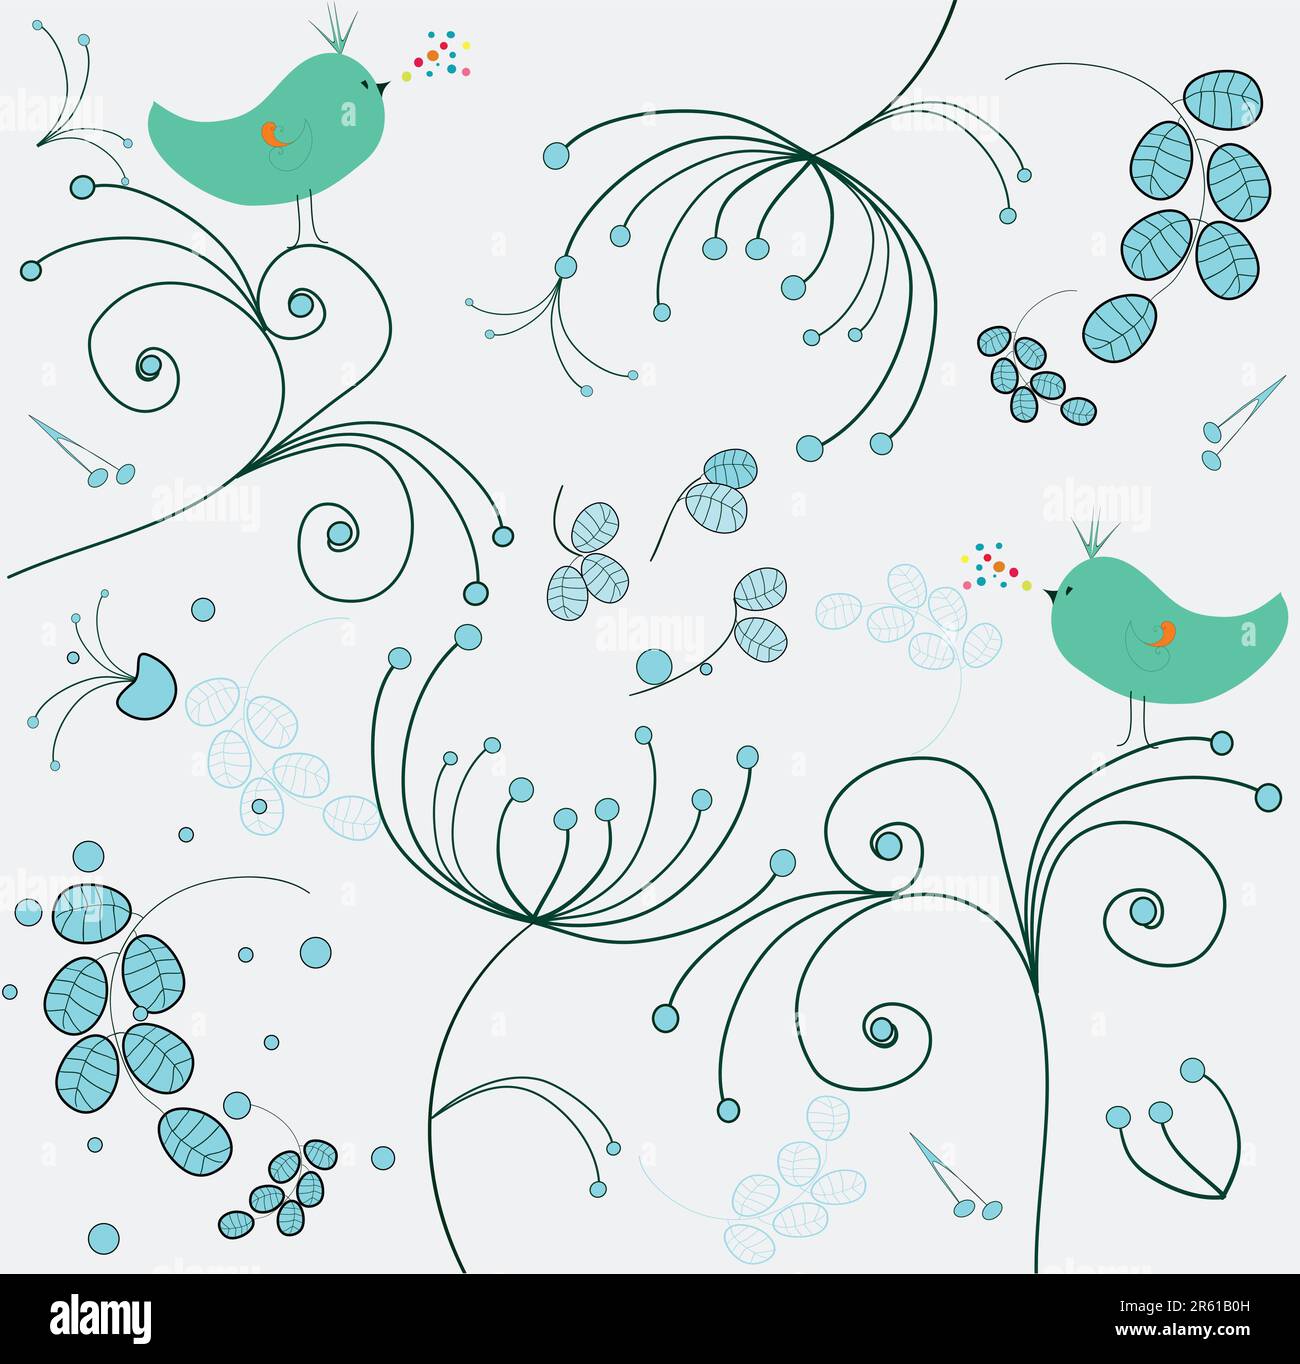 a fantasy wallpaper with cute girds and foliage Stock Vector